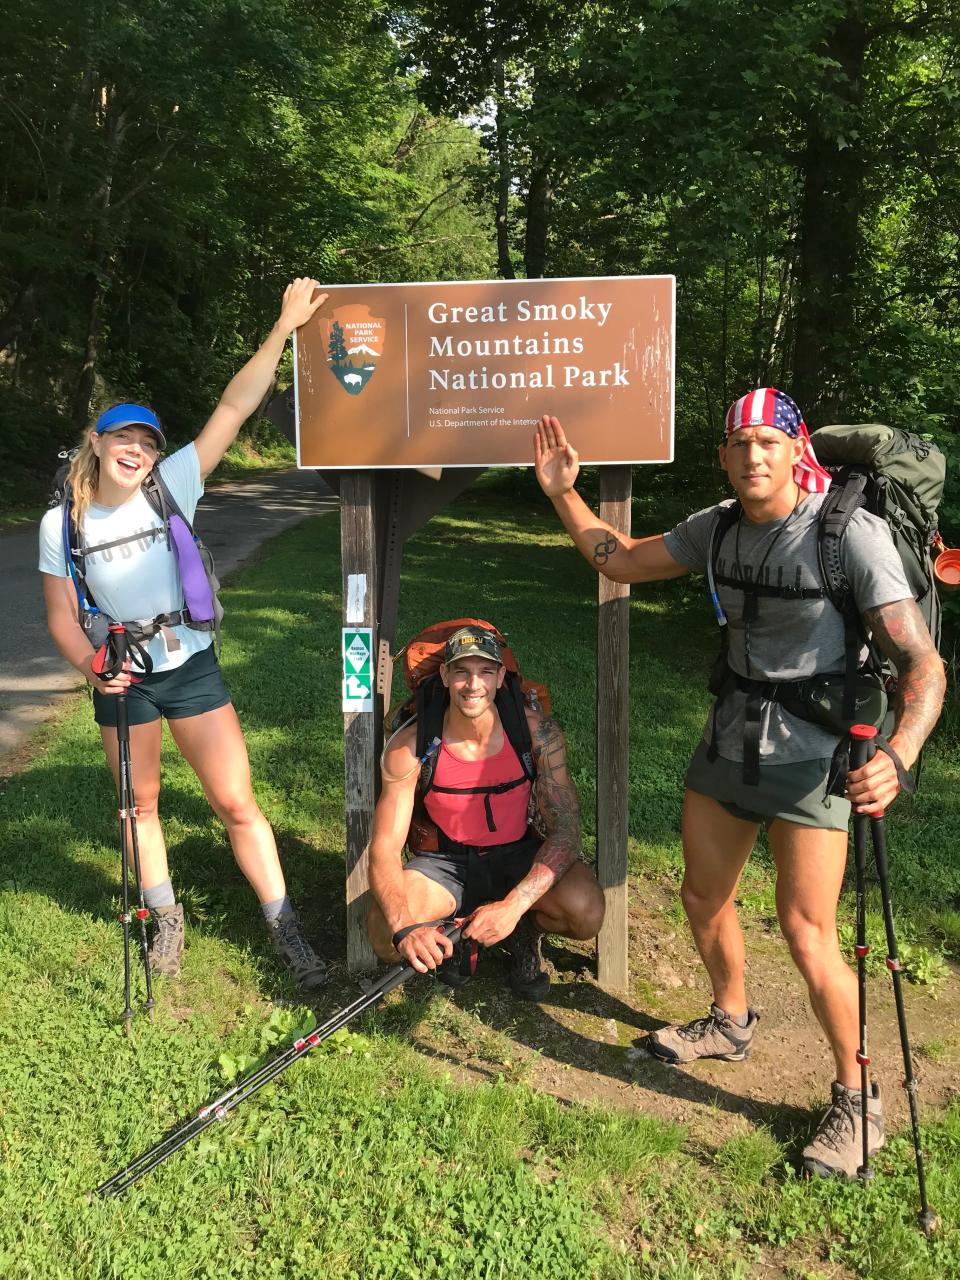 Olympic swimmer Caeleb Dressel took a hiking trip with his family during the pandemic, something he usually isn't able to do during his season. Here he's shown with siblings Kaitlyn and Tyler.